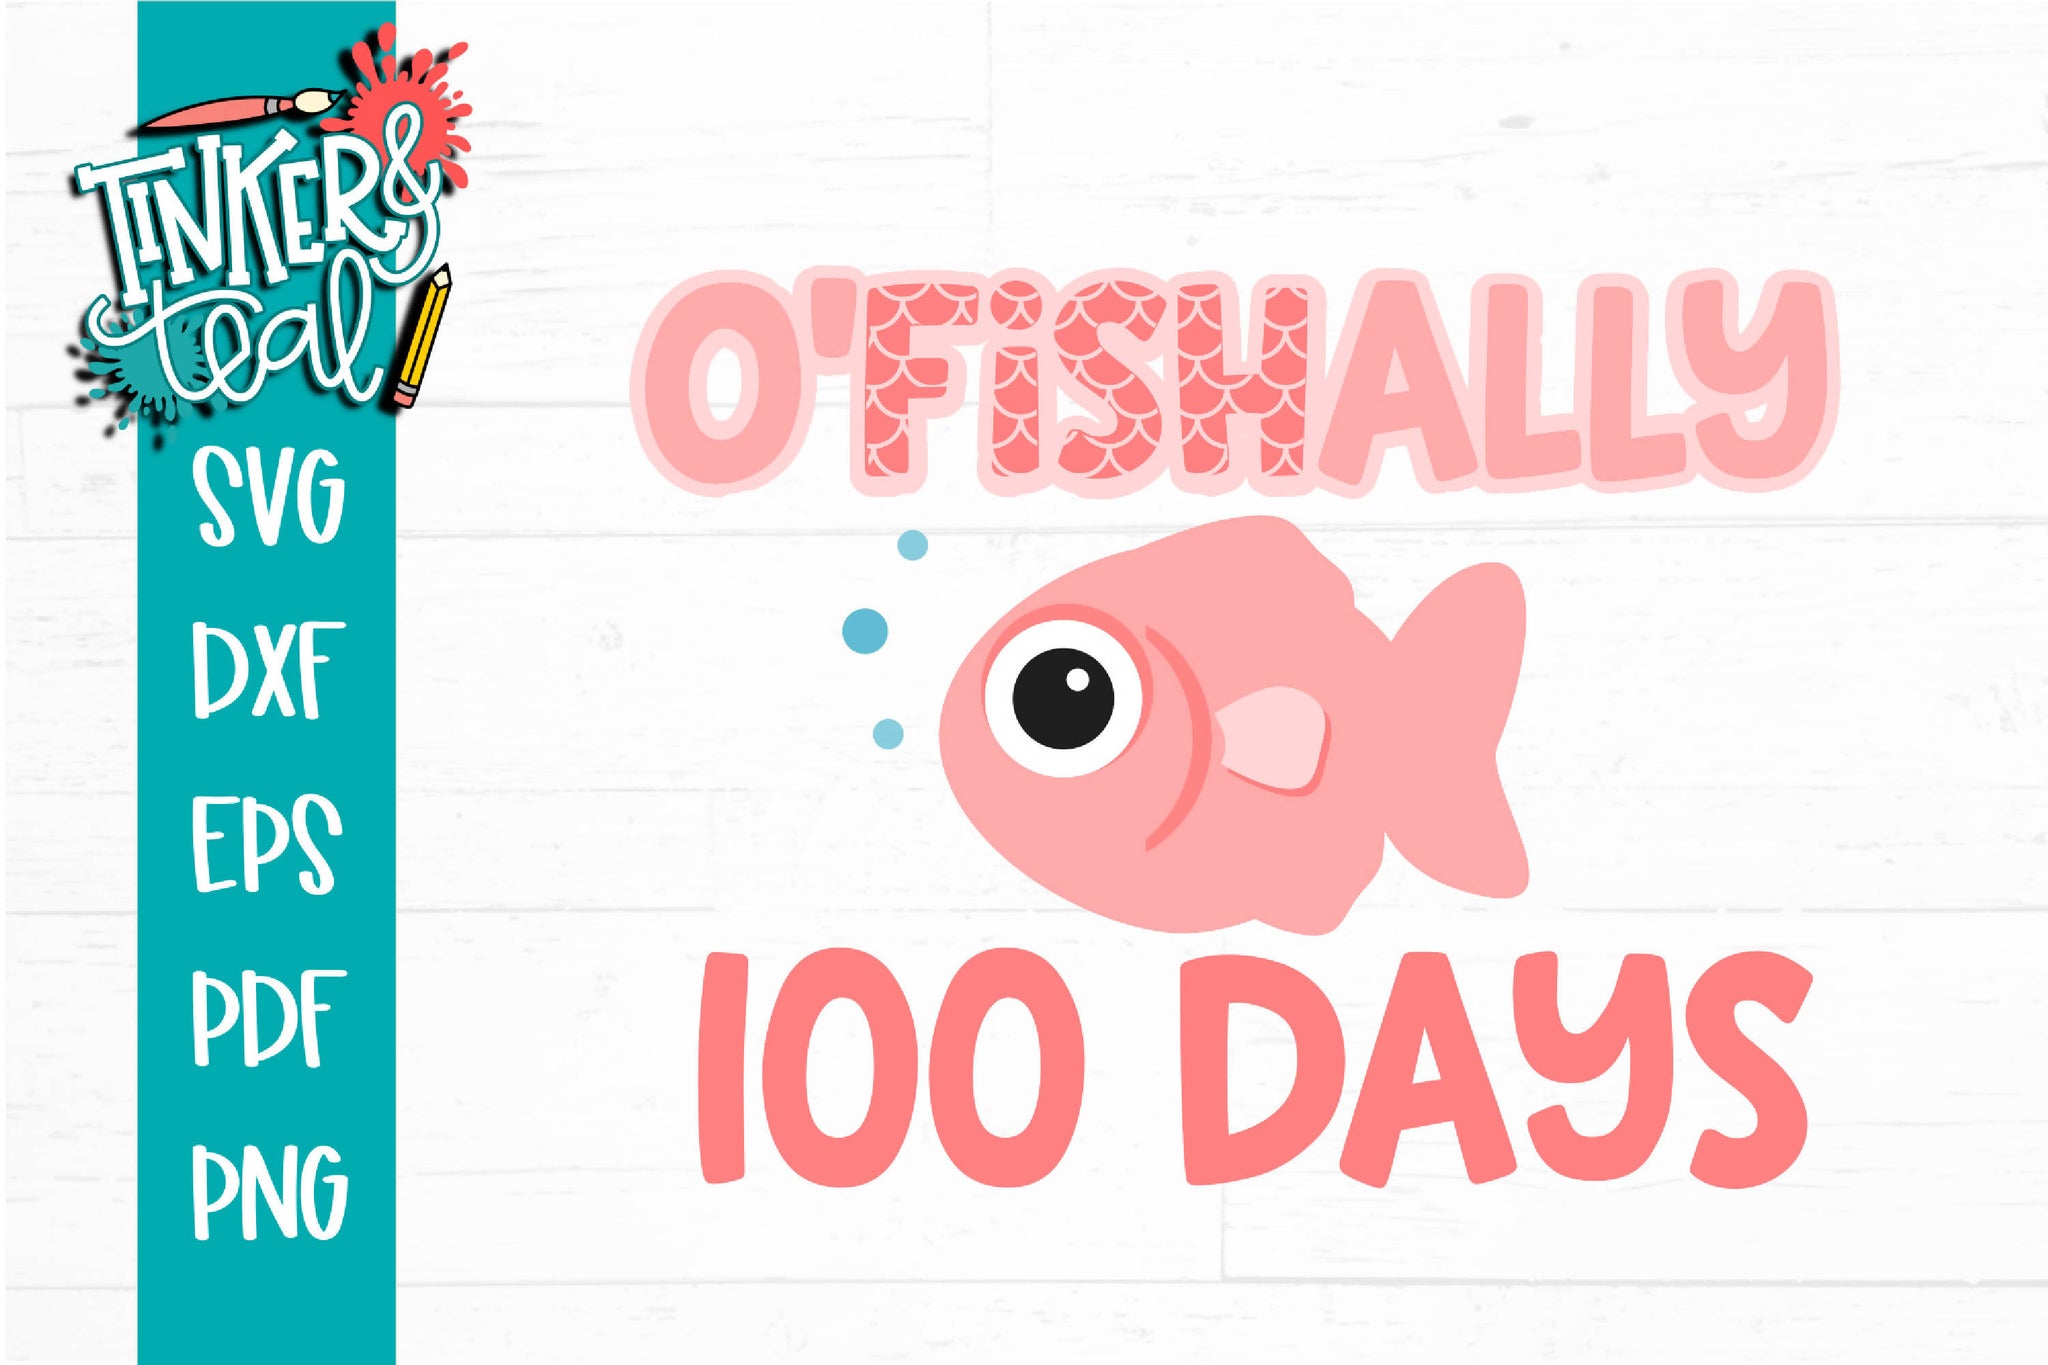 Download Ofishally One Svg Free O Fish Ally One Free Font Link Included To Personalize 439265 Svgs Design Bundles Create Your Diy Shirts Decals And Much More Using Your Cricut Explore